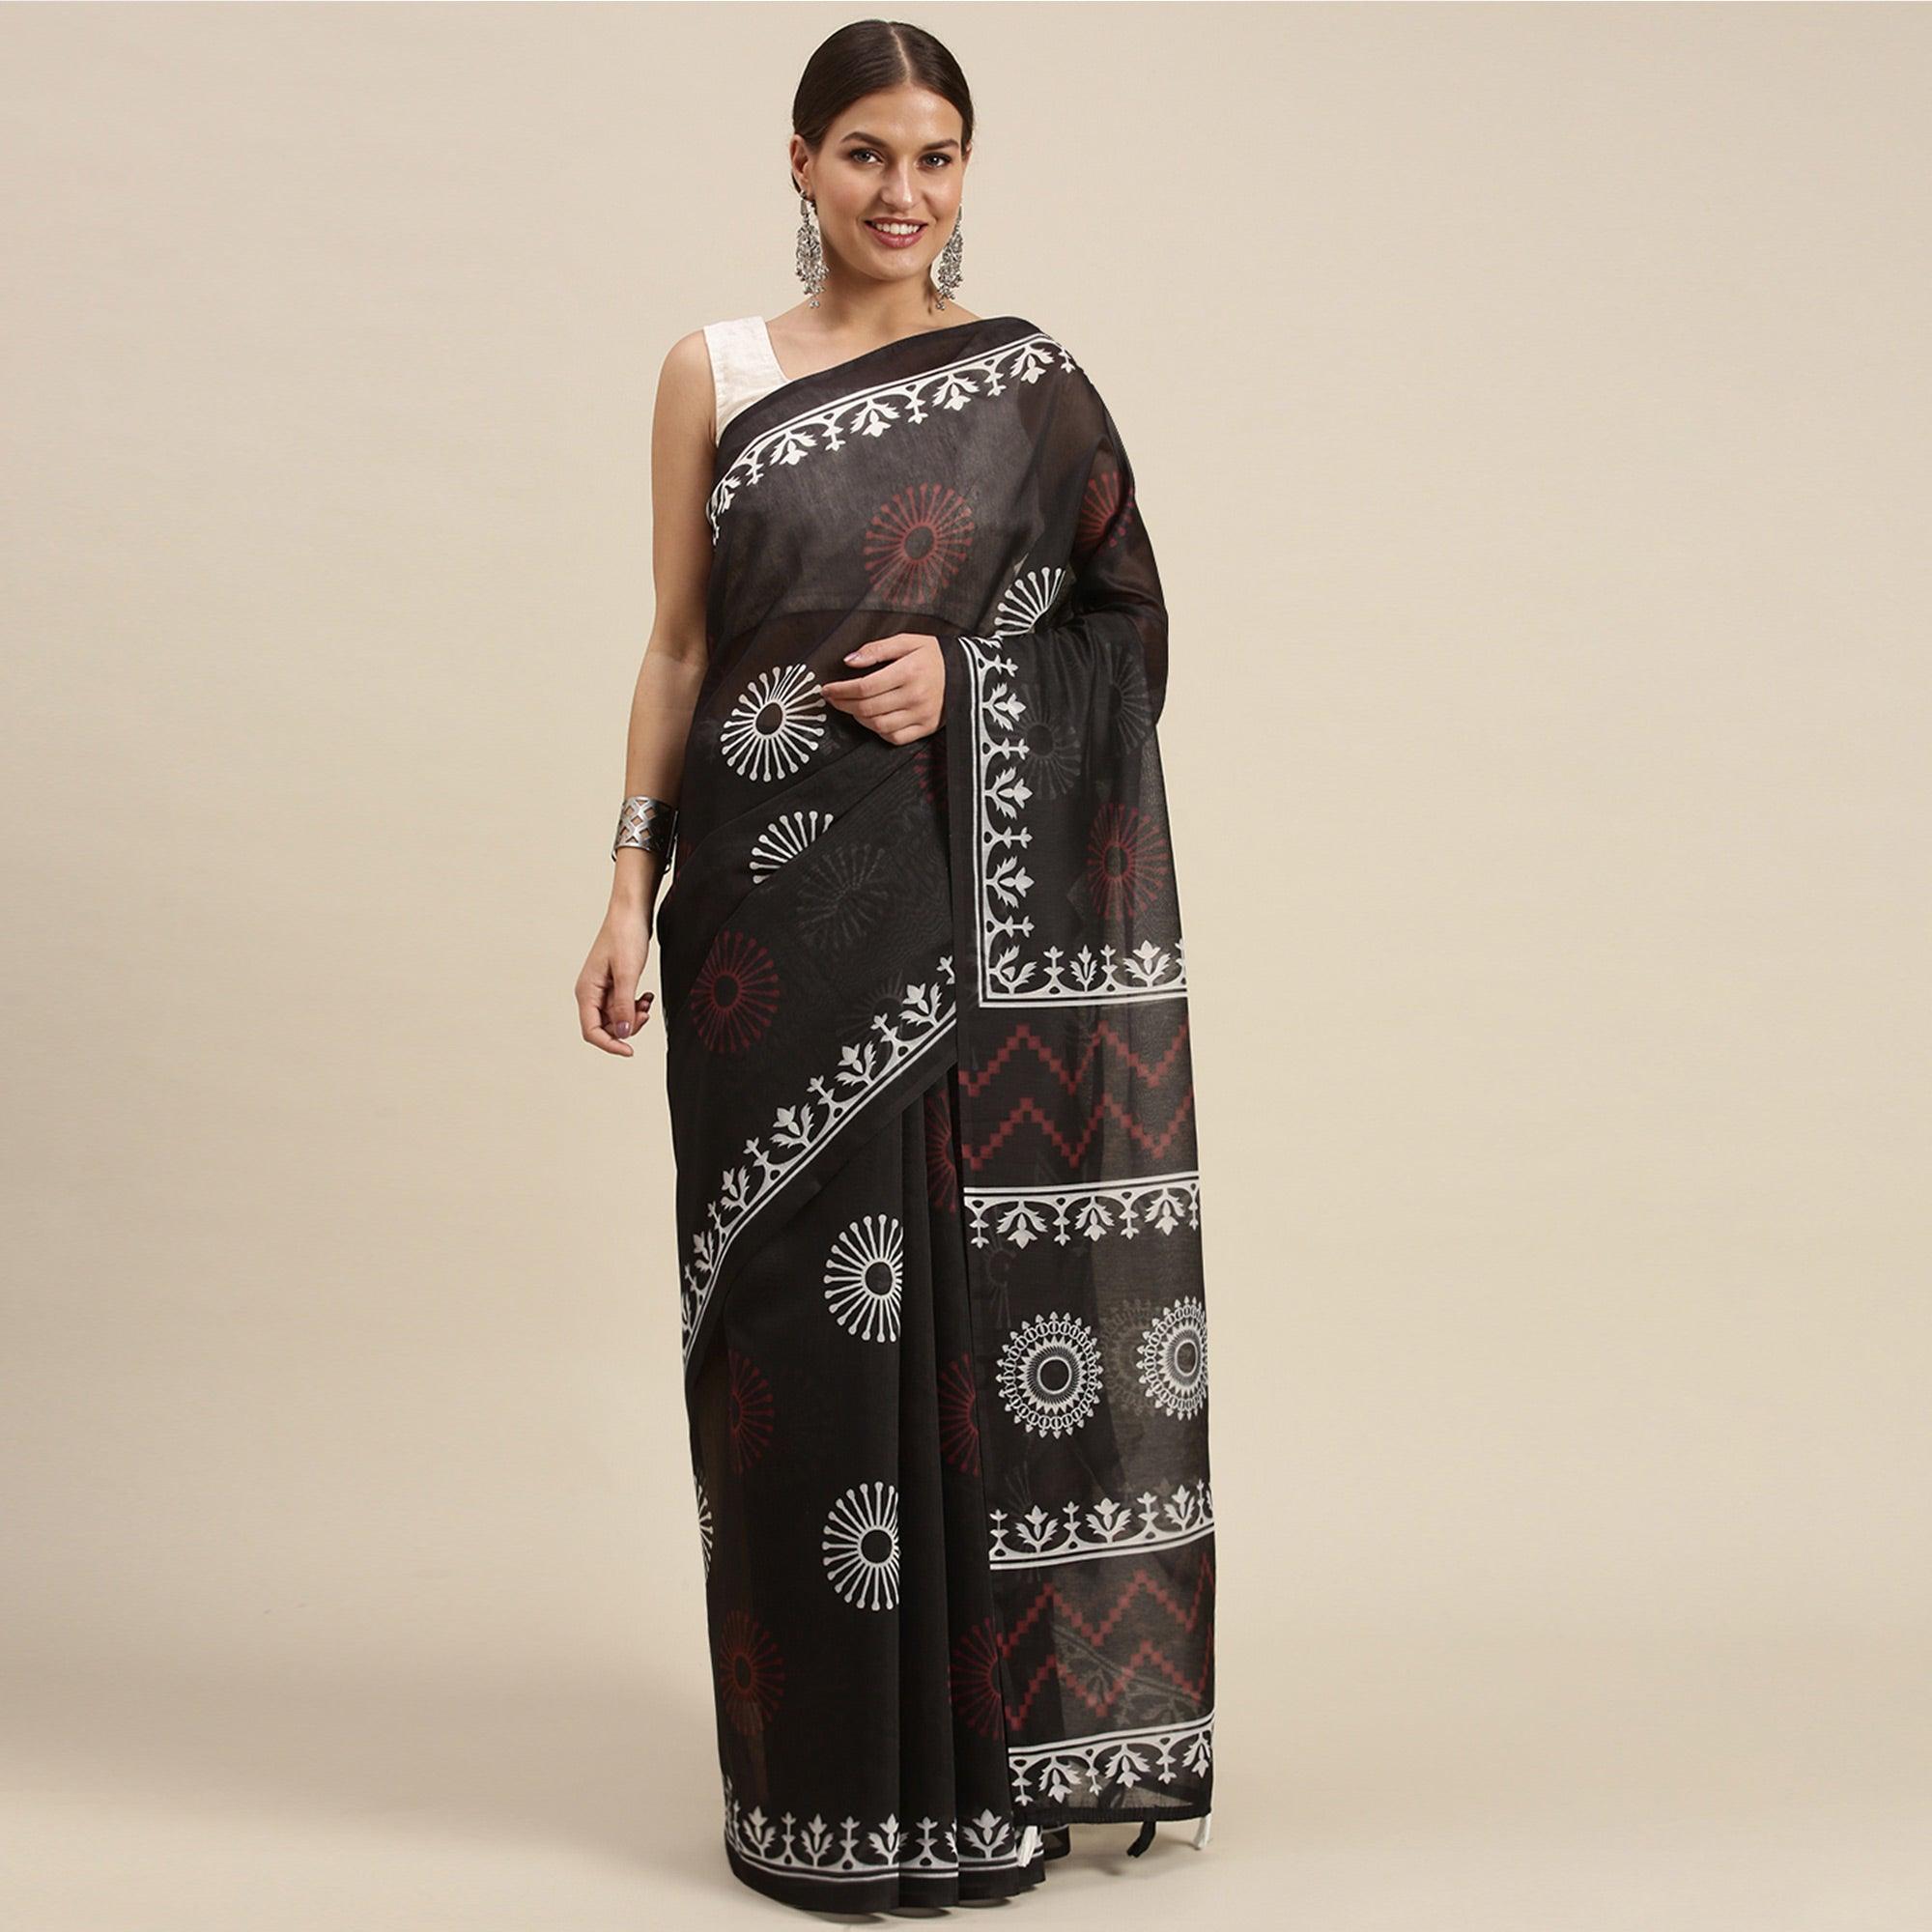 Black Casual Wear Printed Cotton Blend Saree With Tassels - Peachmode